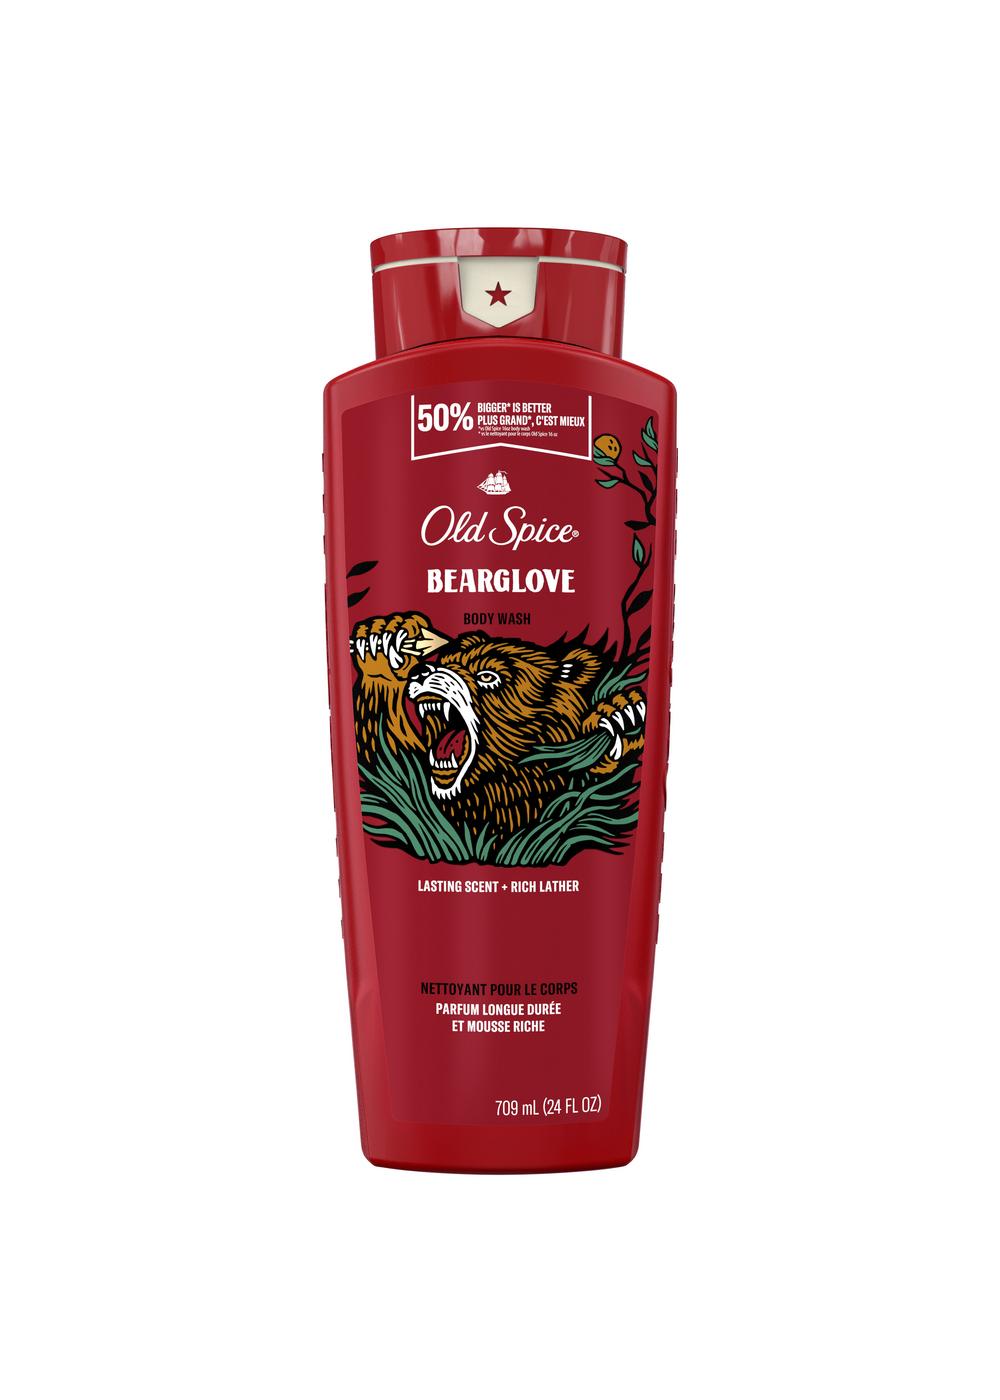 Old Spice Body Wash - Bearglove; image 1 of 2